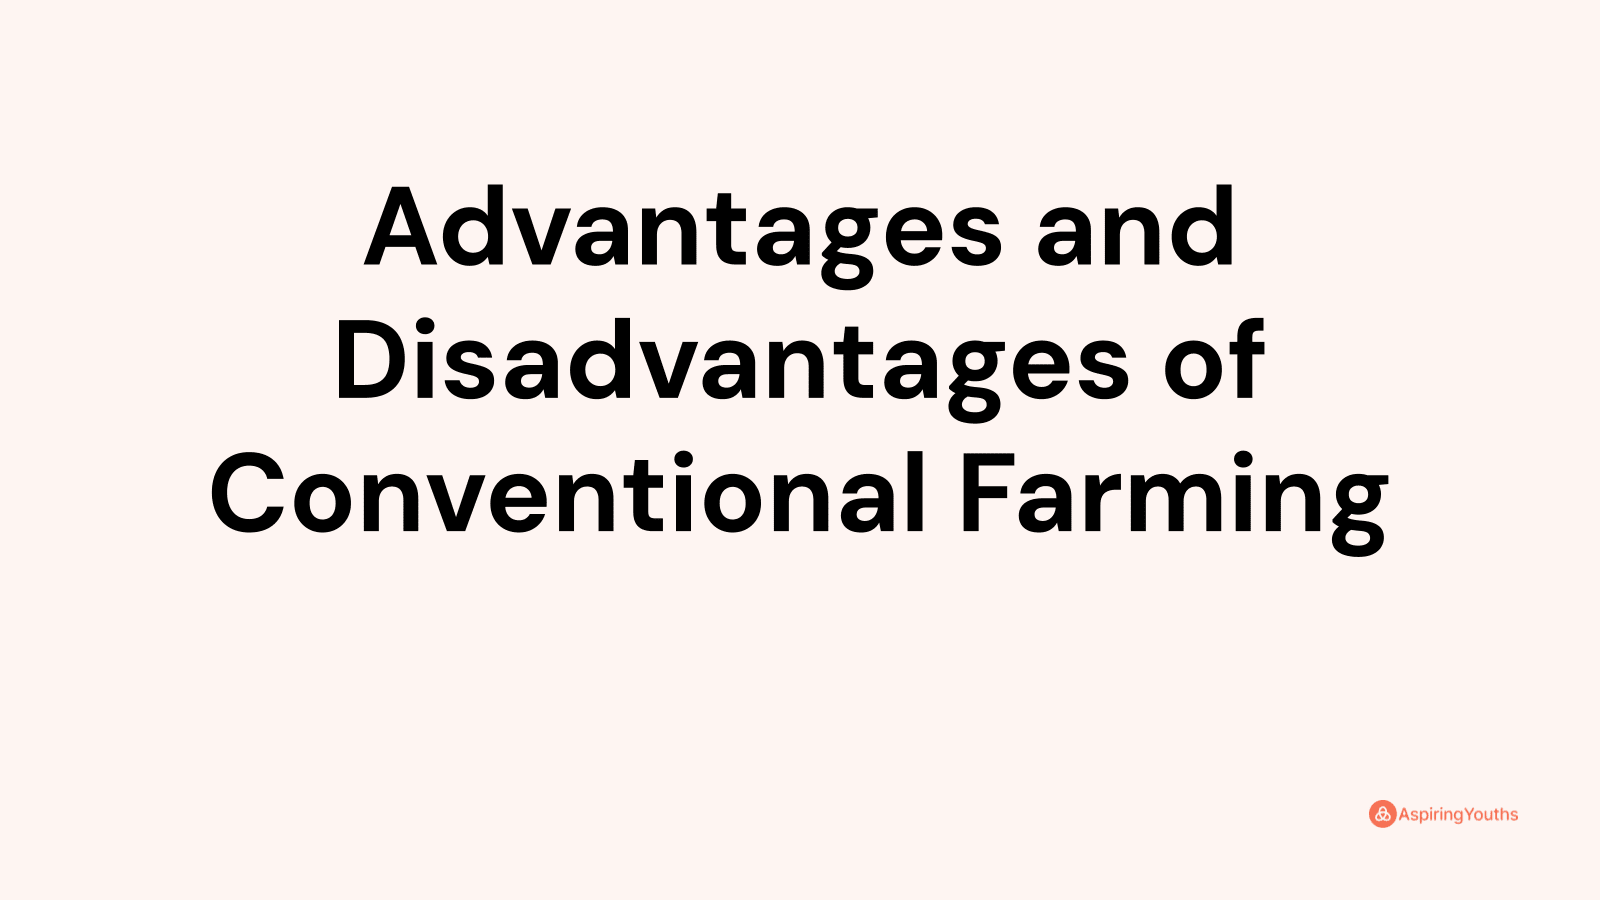 Advantages and disadvantages of Conventional Farming